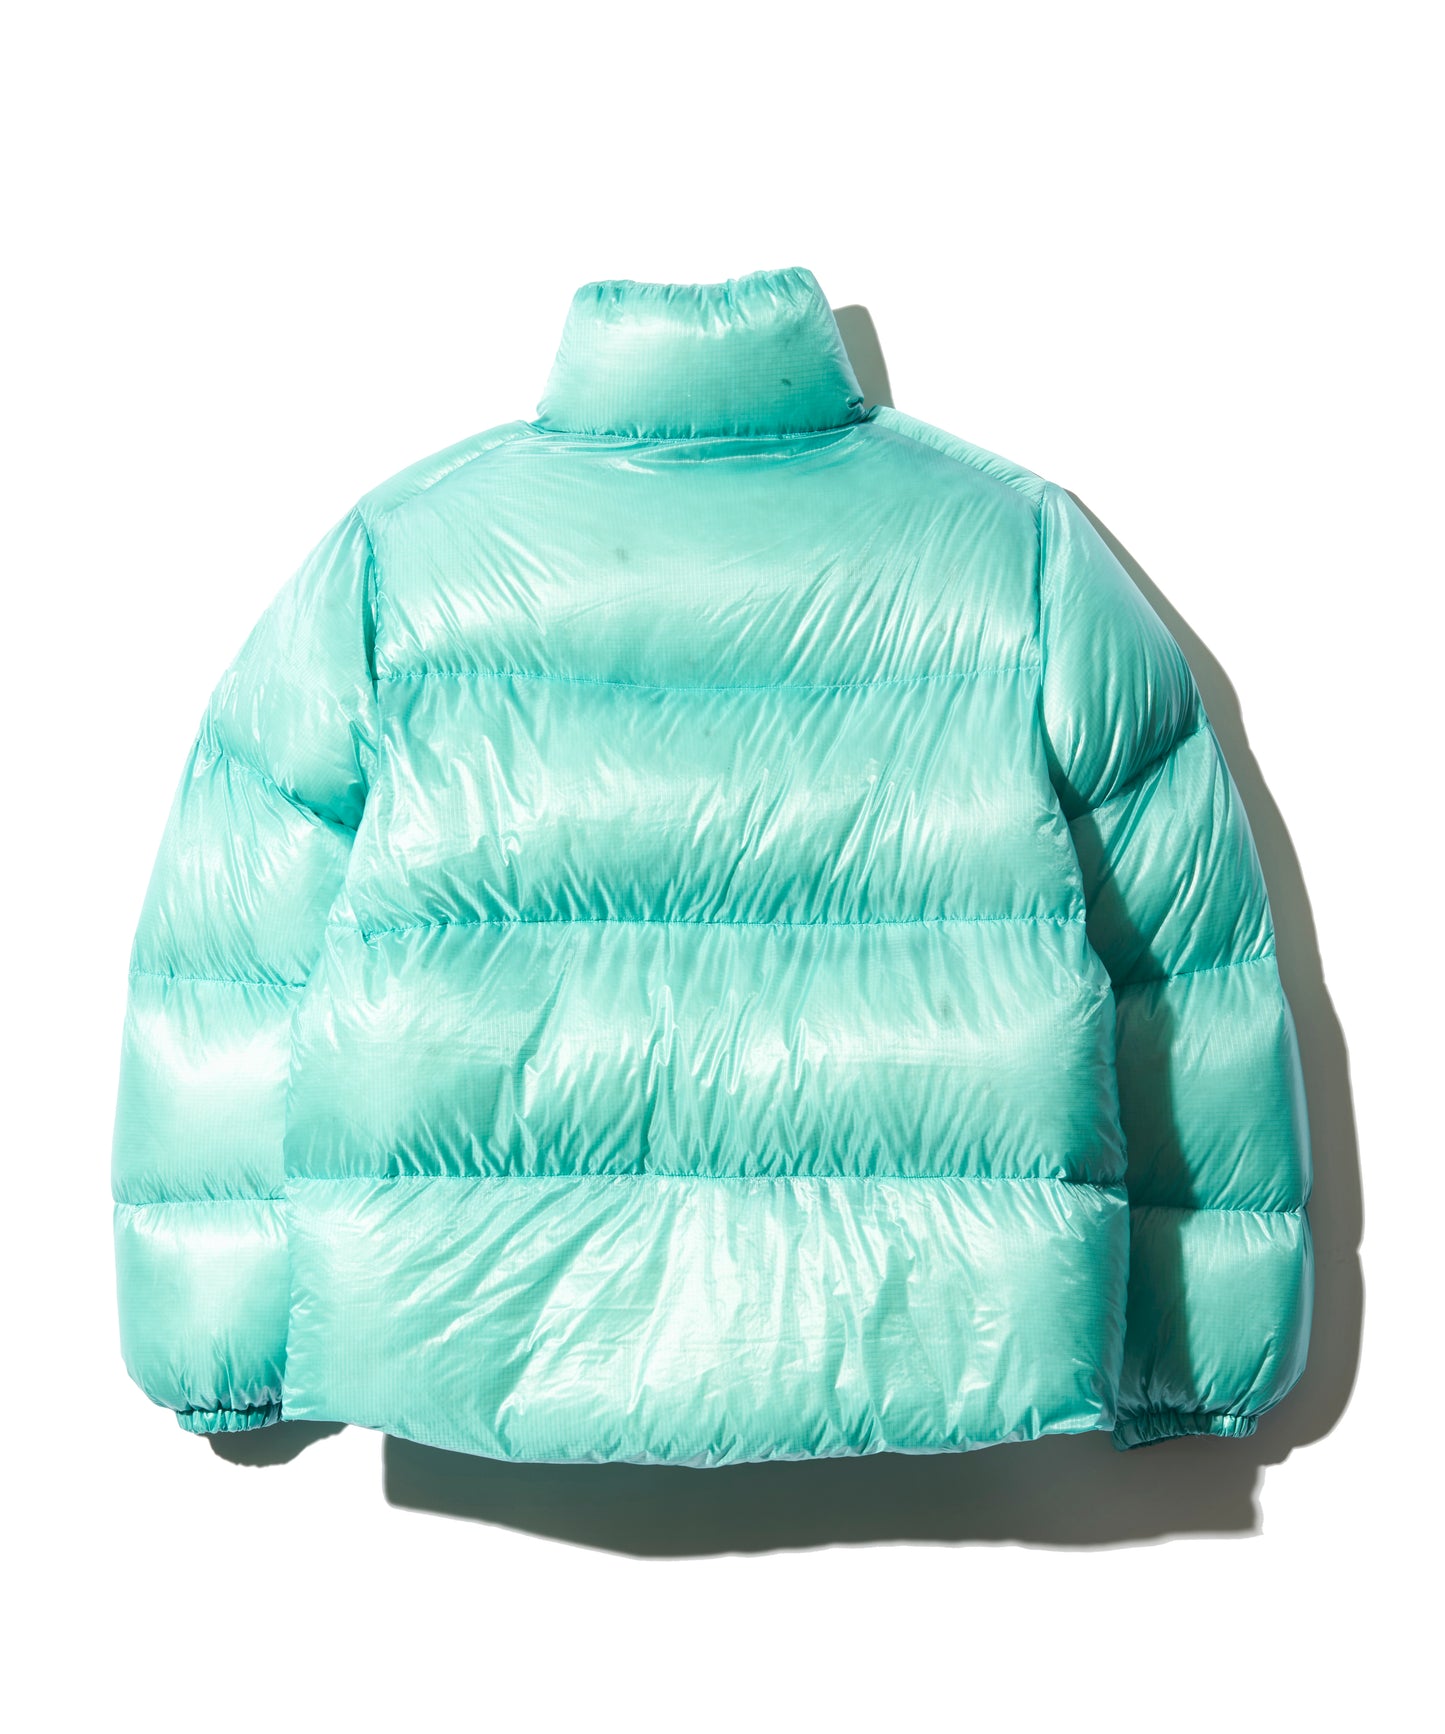 【 23FW新作 】RMFC NS JACKET / MINT（LIMITED COLOR）